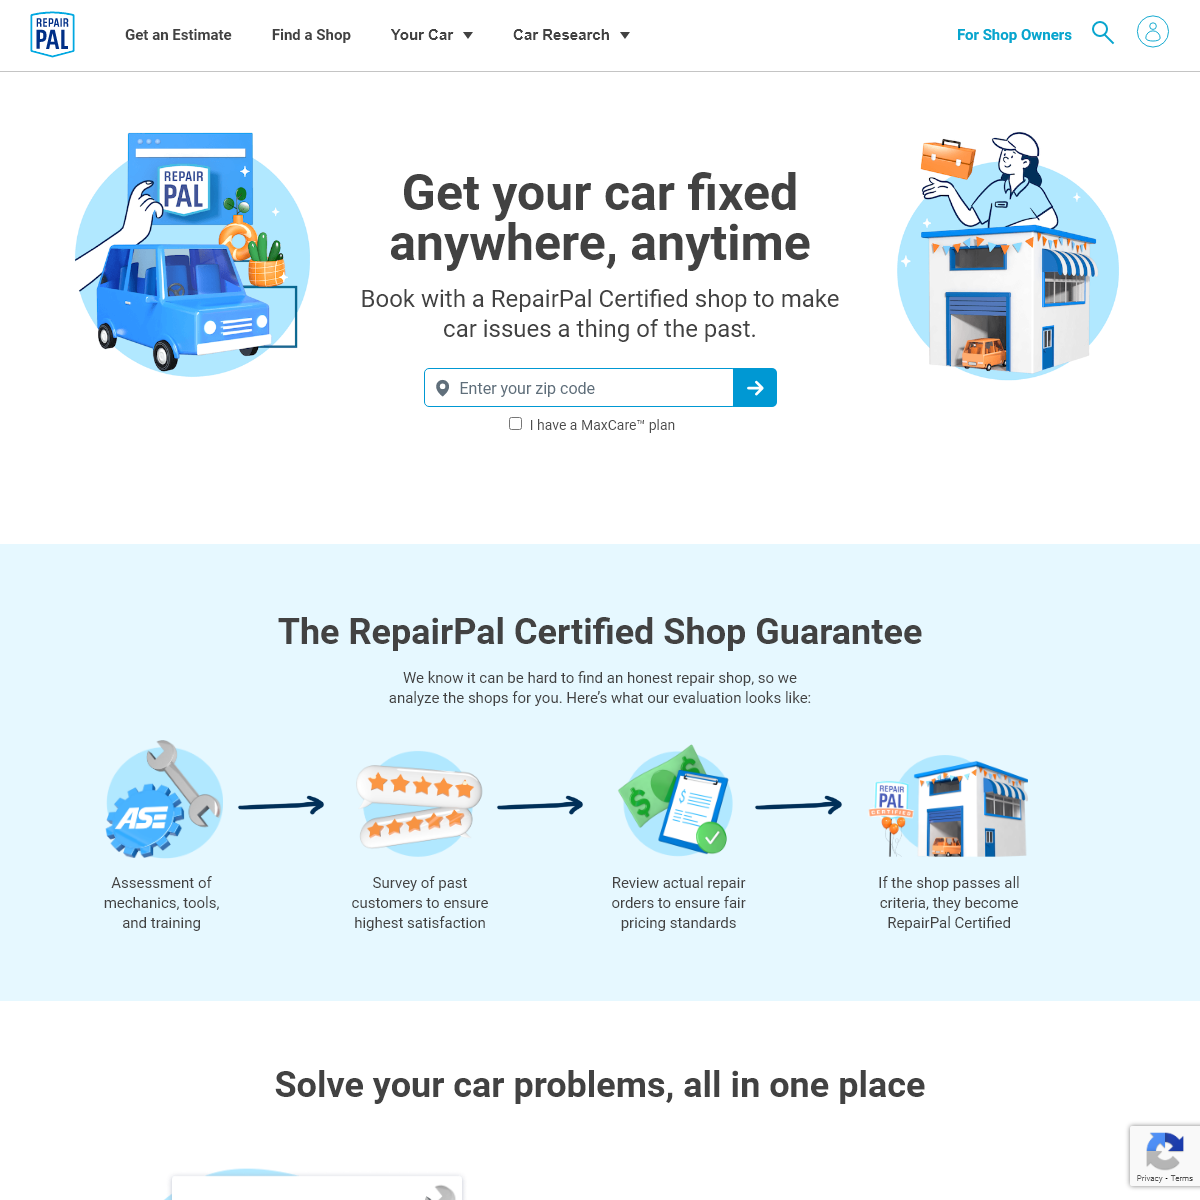 A complete backup of repairpal.com